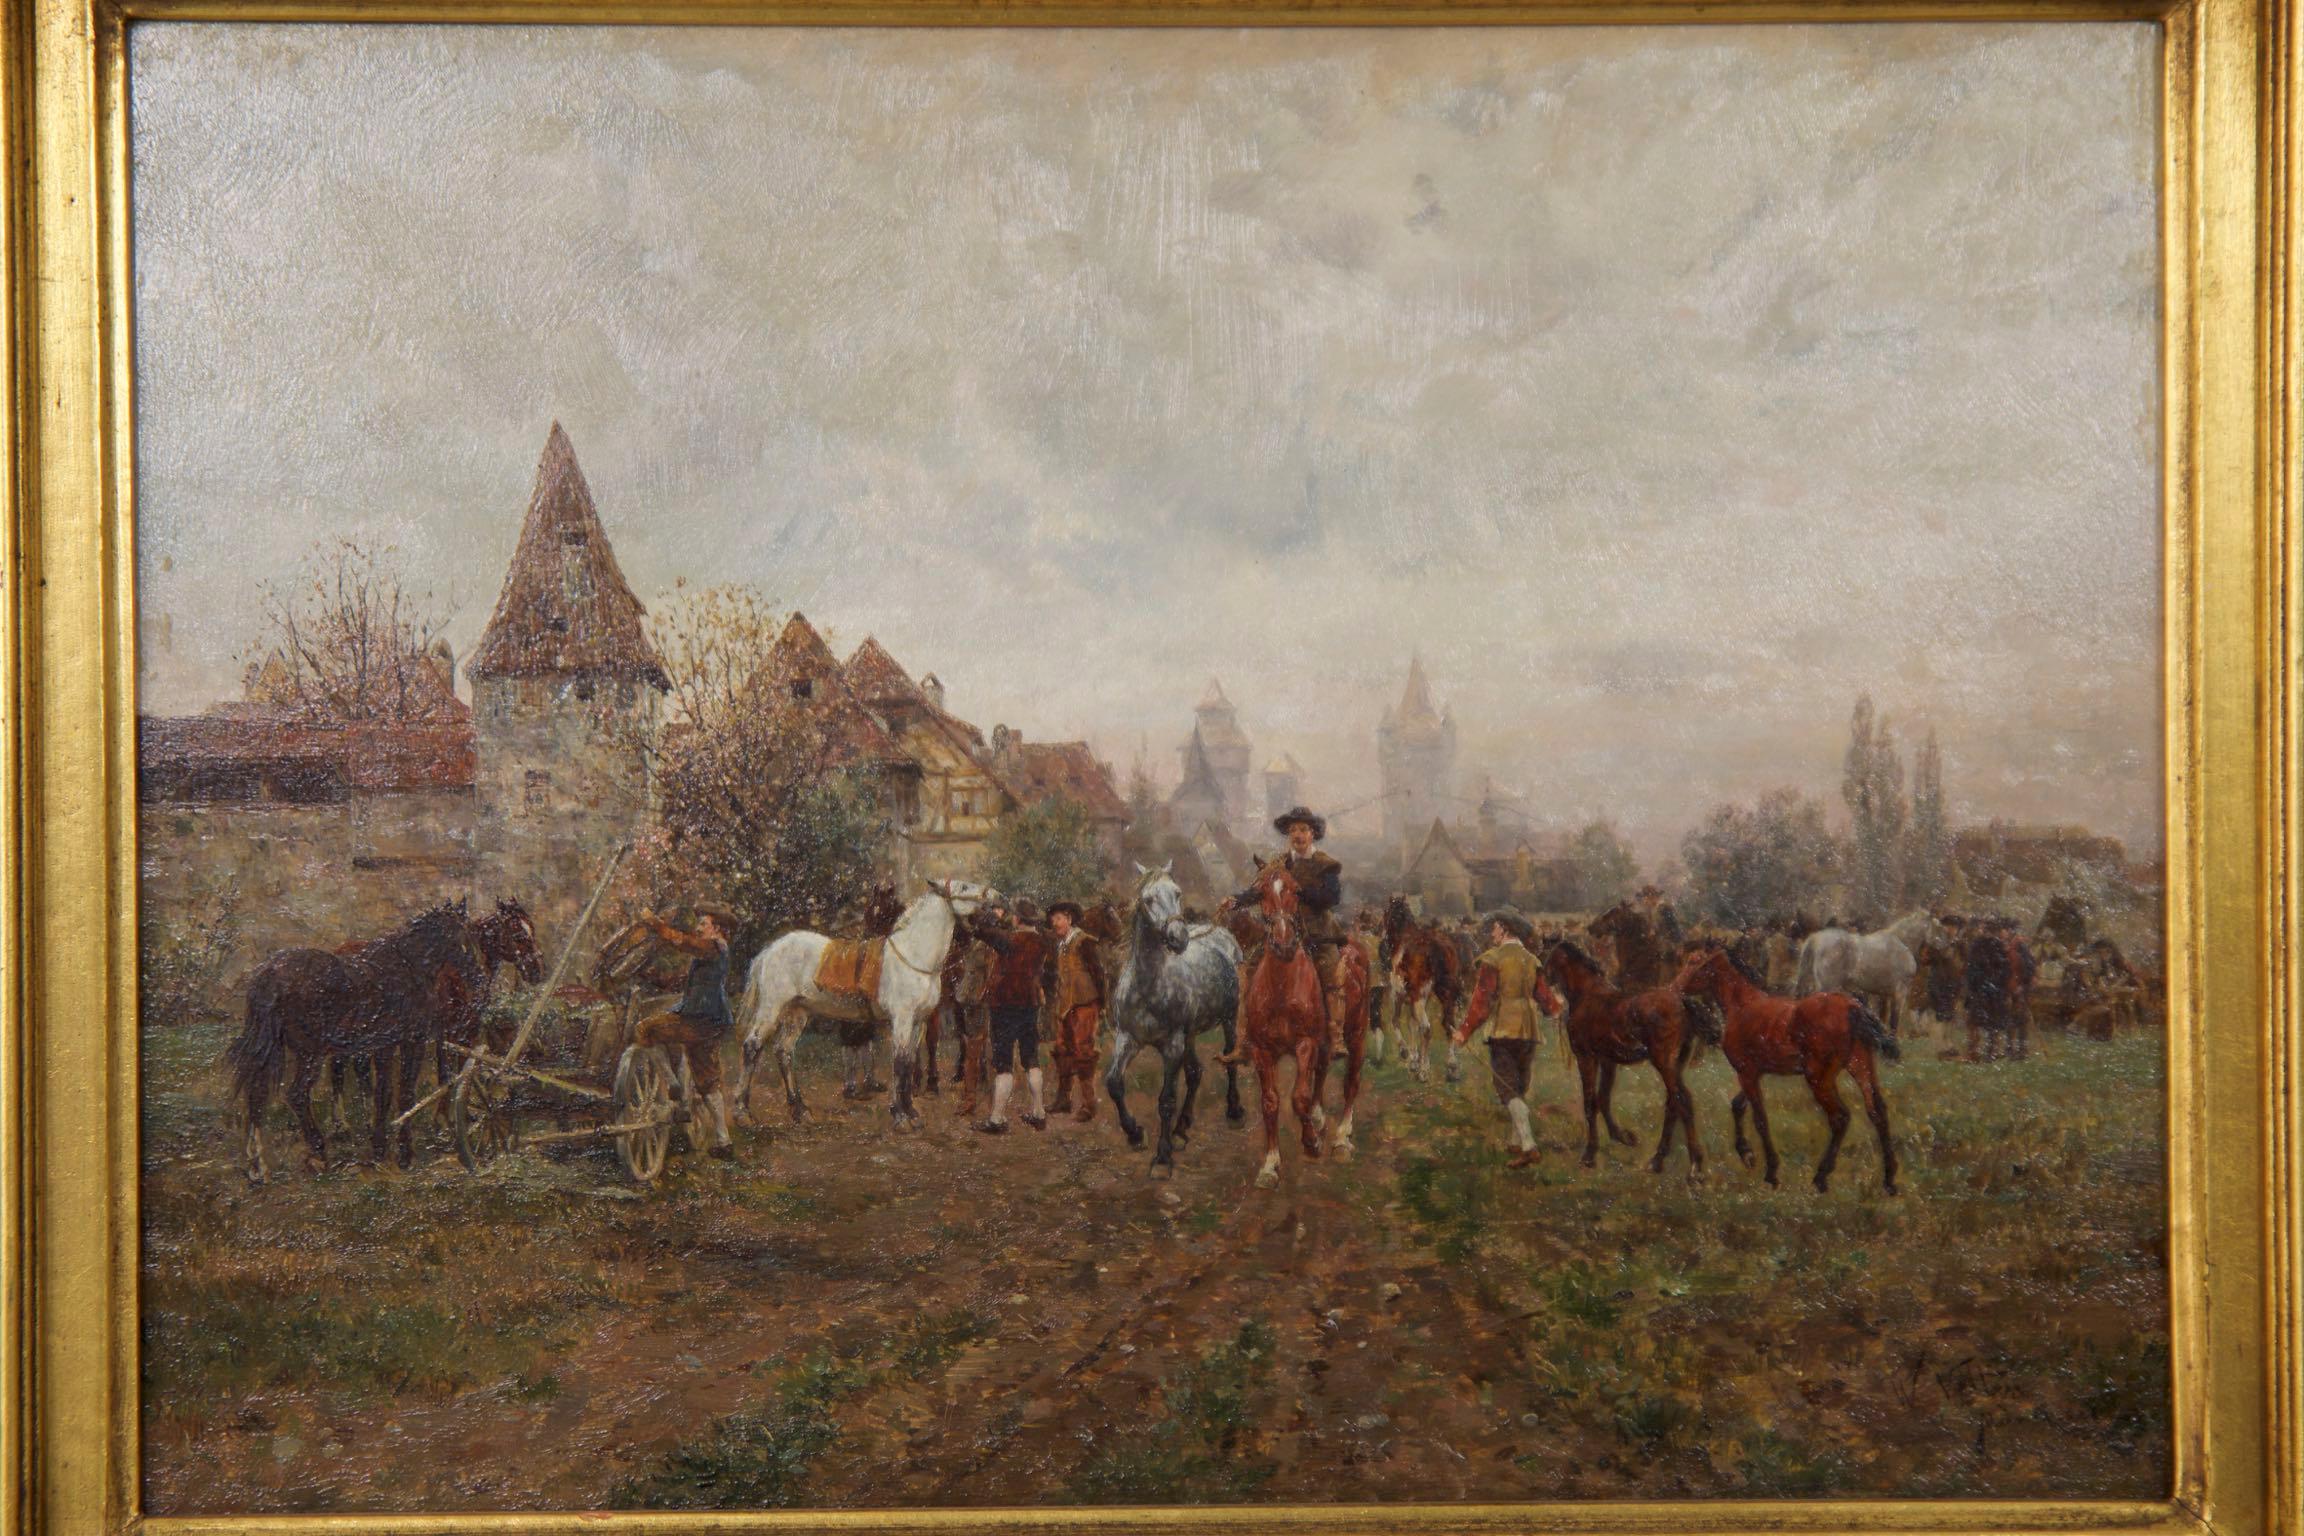 Typical of work by Velten, this small oil panel is tightly and precisely painted with such an exquisite level of detailing; it is a highly complex scene with nearly a dozen figures and nearly as many horses in the fore and mid-grounds. His paintings